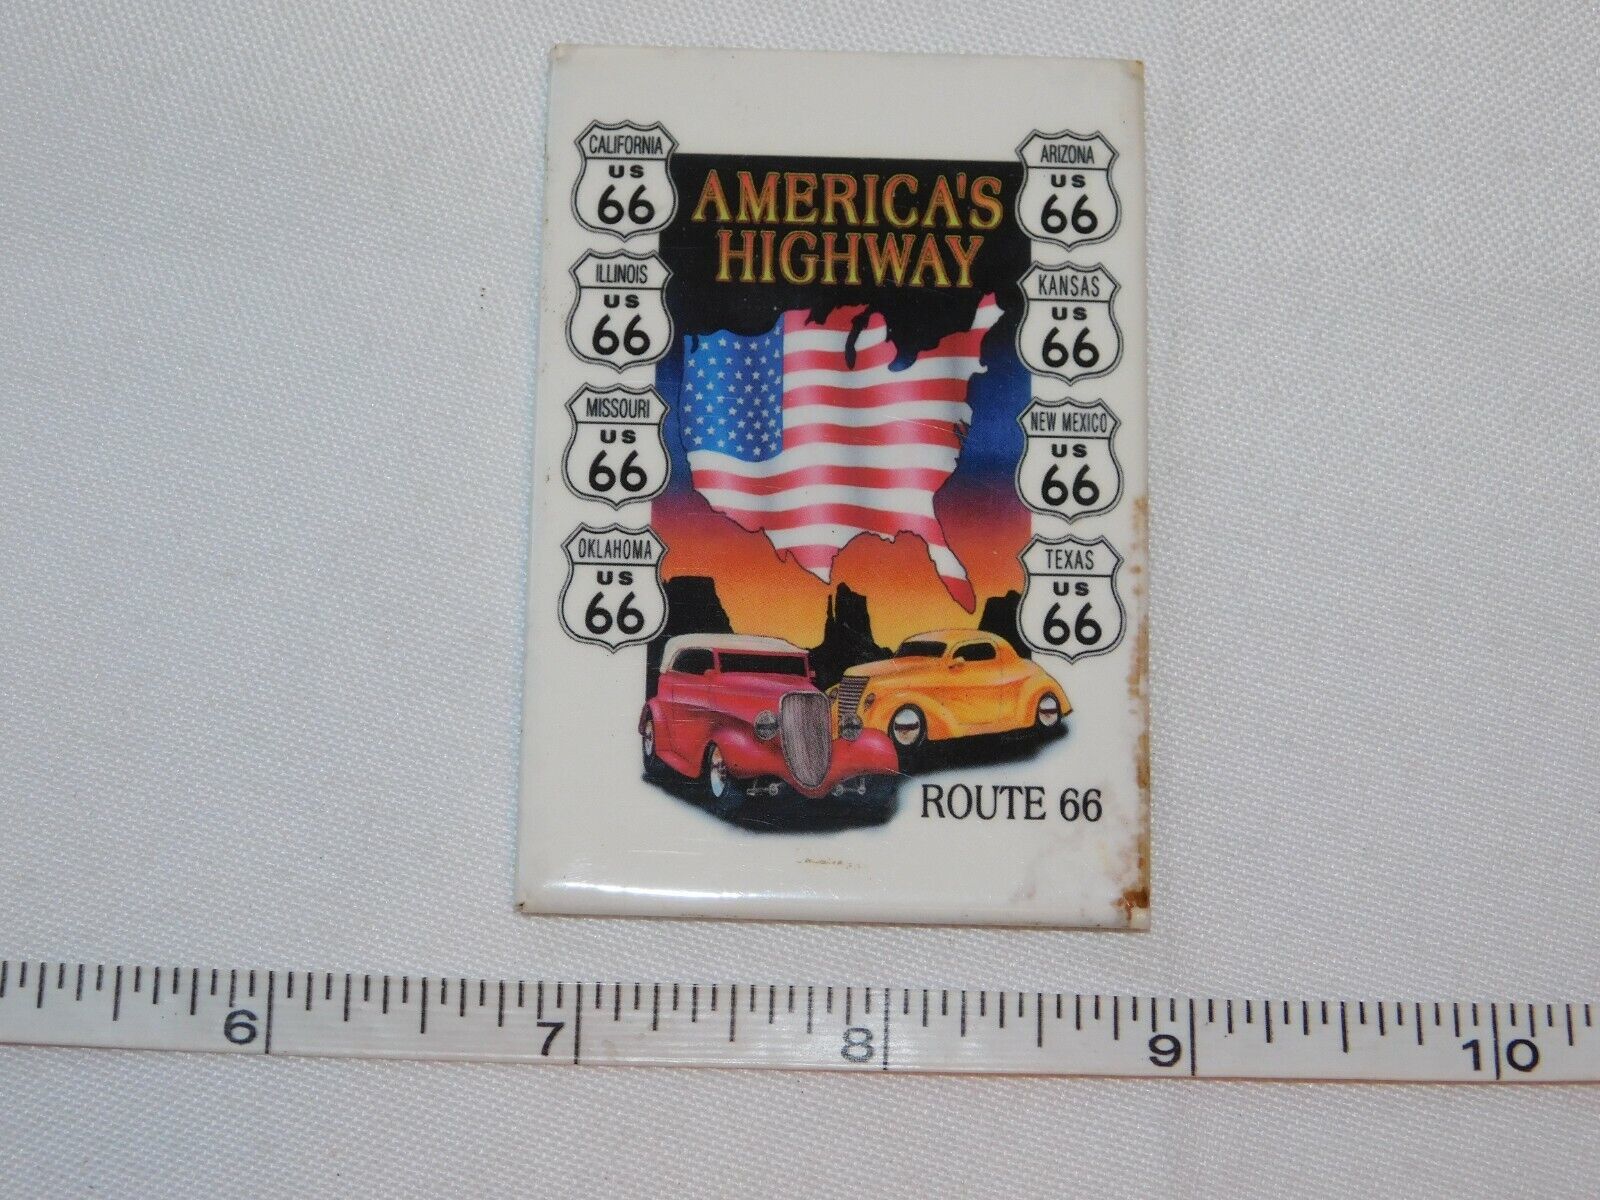 Primary image for Desperate Enterprises America's Highway Route US 66 magnet 2 1/8" X 3"